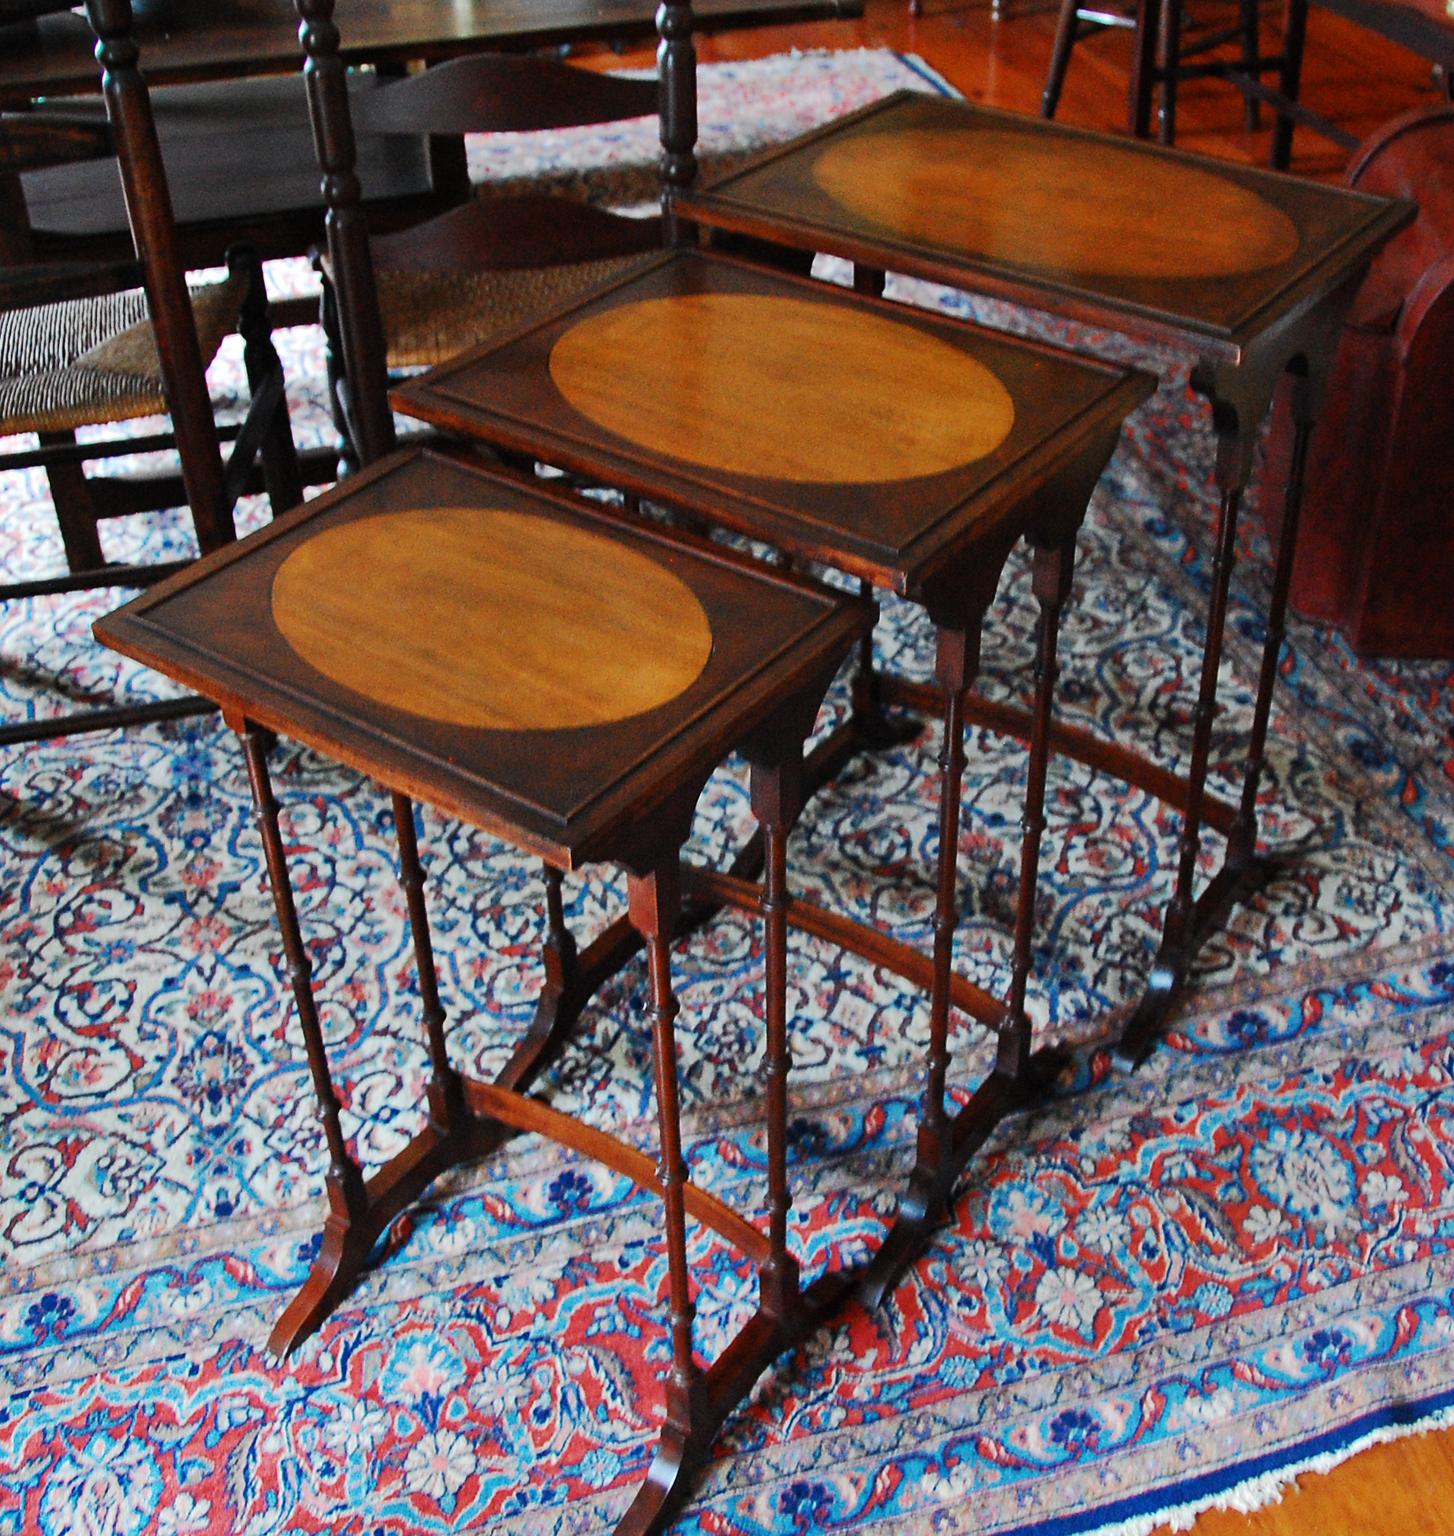 English Edwardian Set of Three Mahogany Nesting Tables with Satinwood Inlay In Good Condition For Sale In Wells, ME